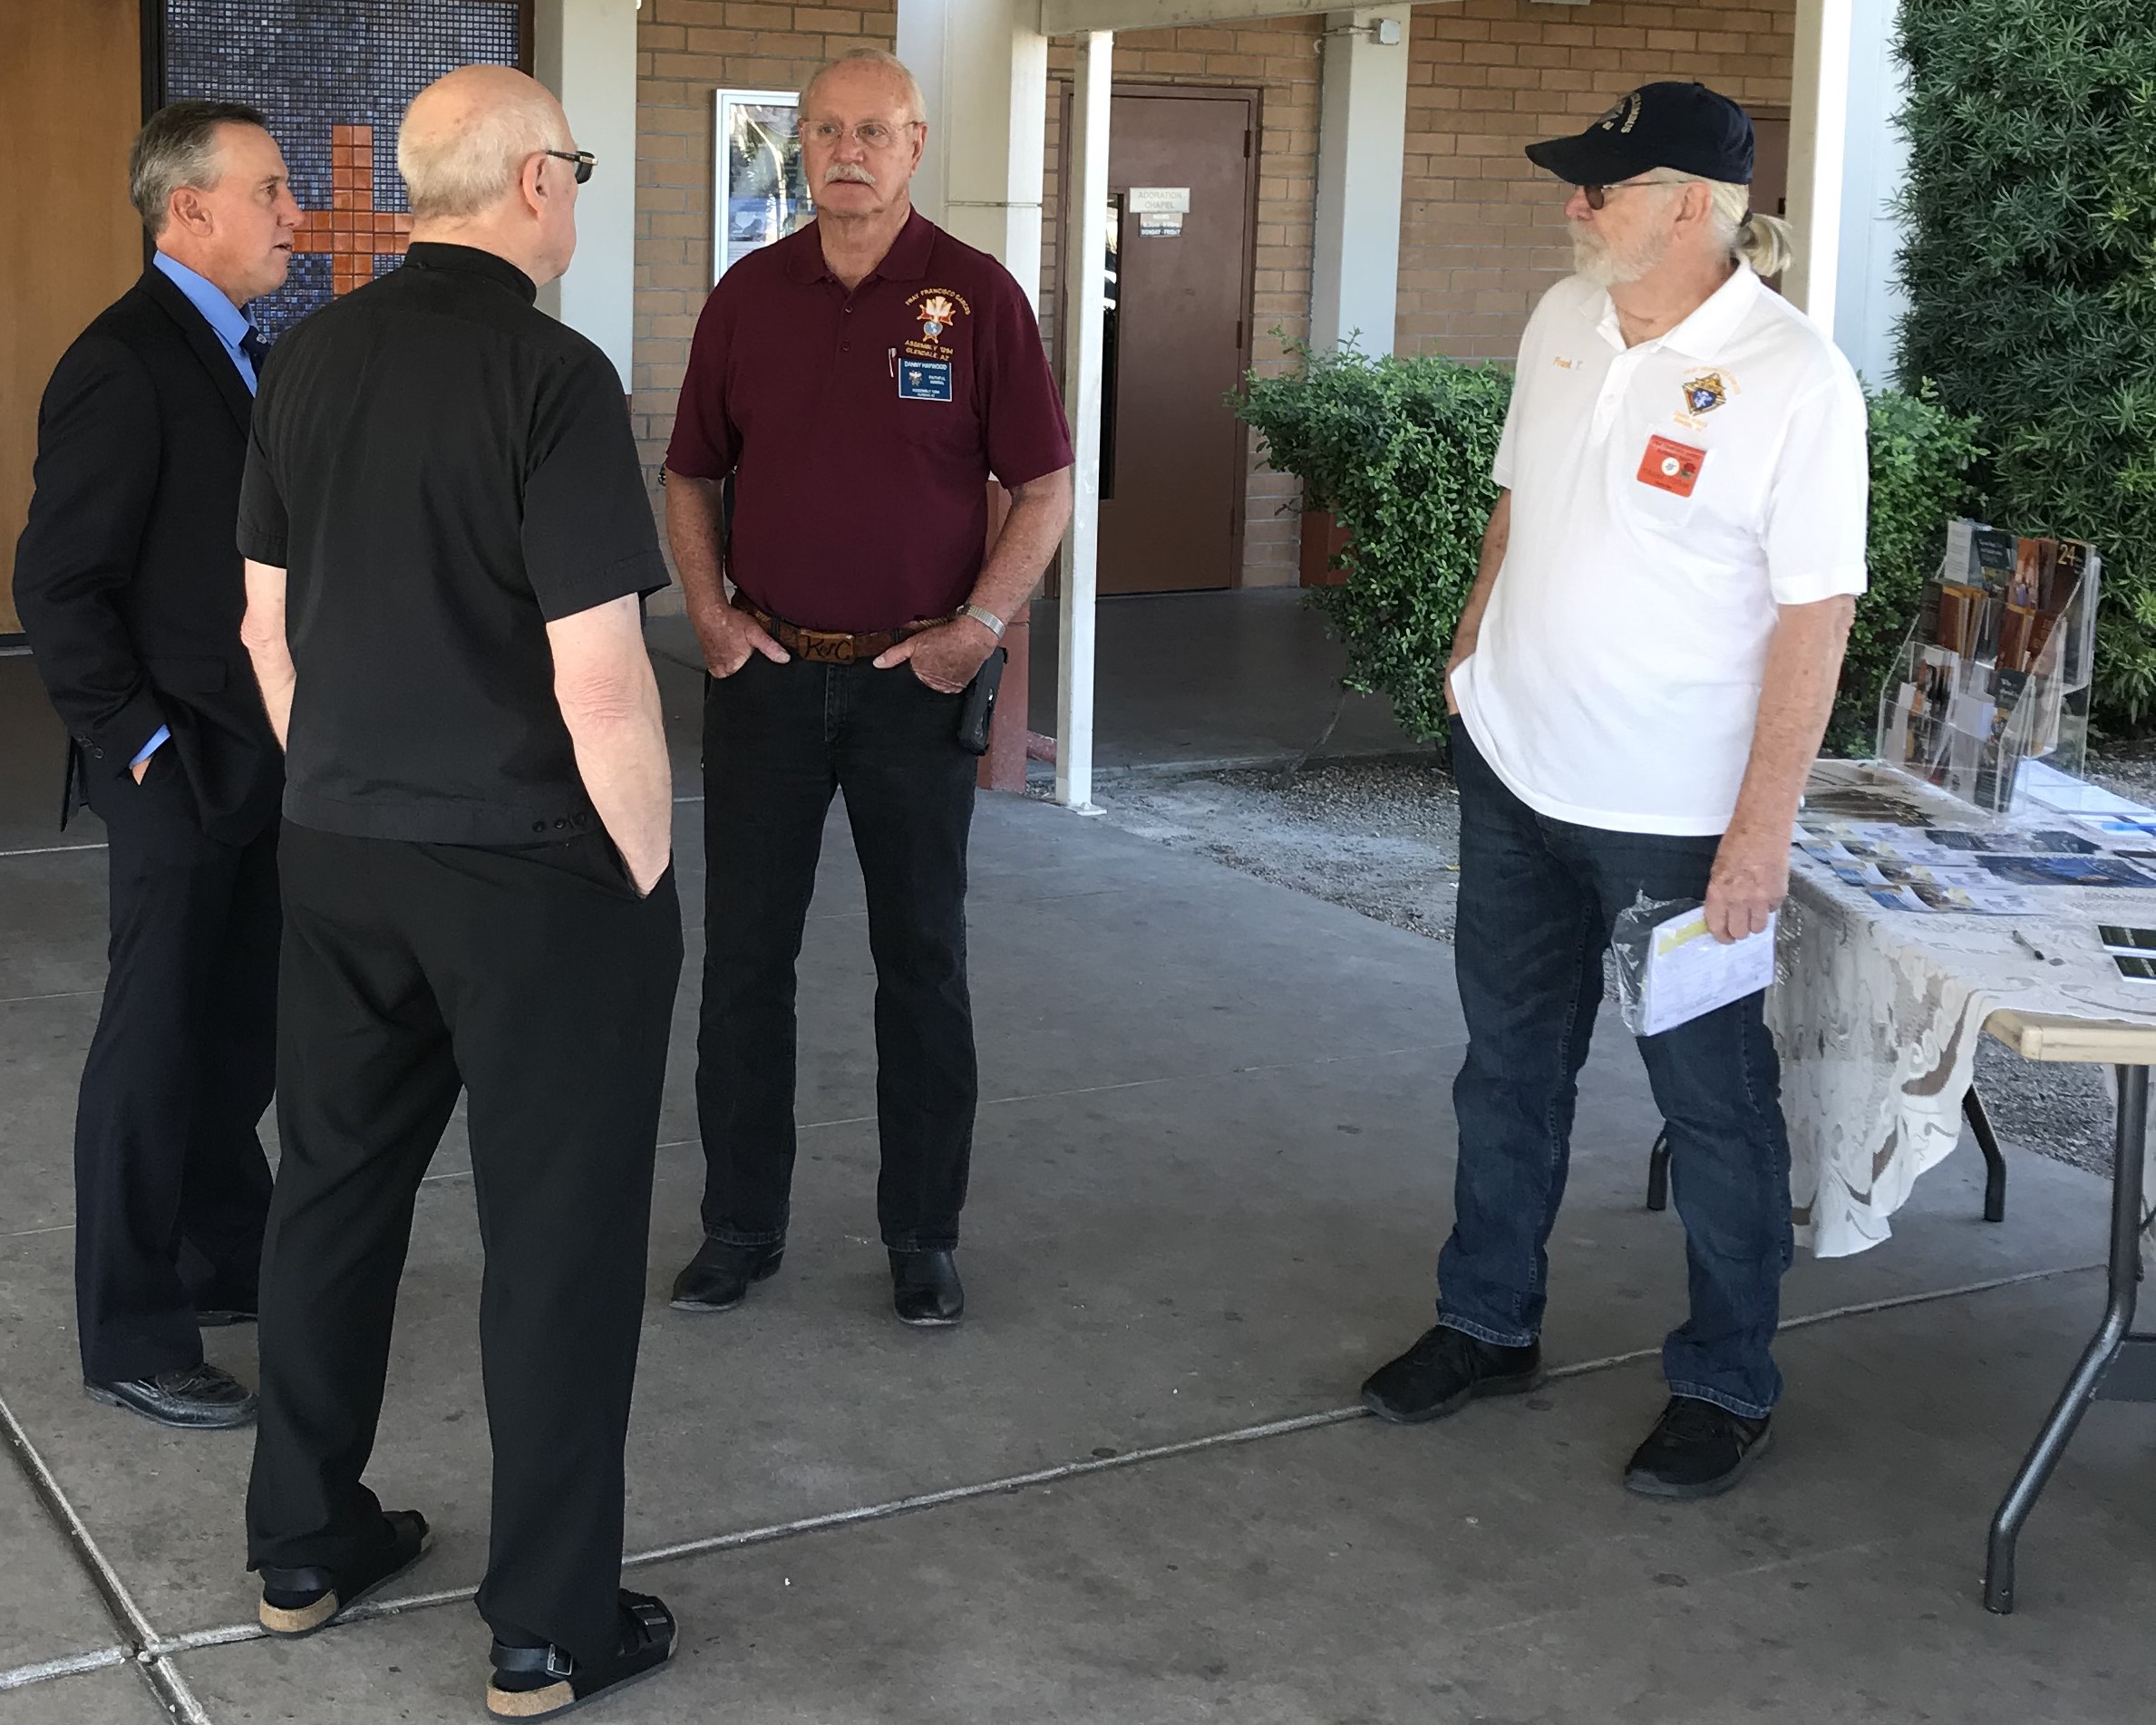 Membership Drive at SLK_Fr Suss with Matt H., Danny H., and Frank T._March 2019